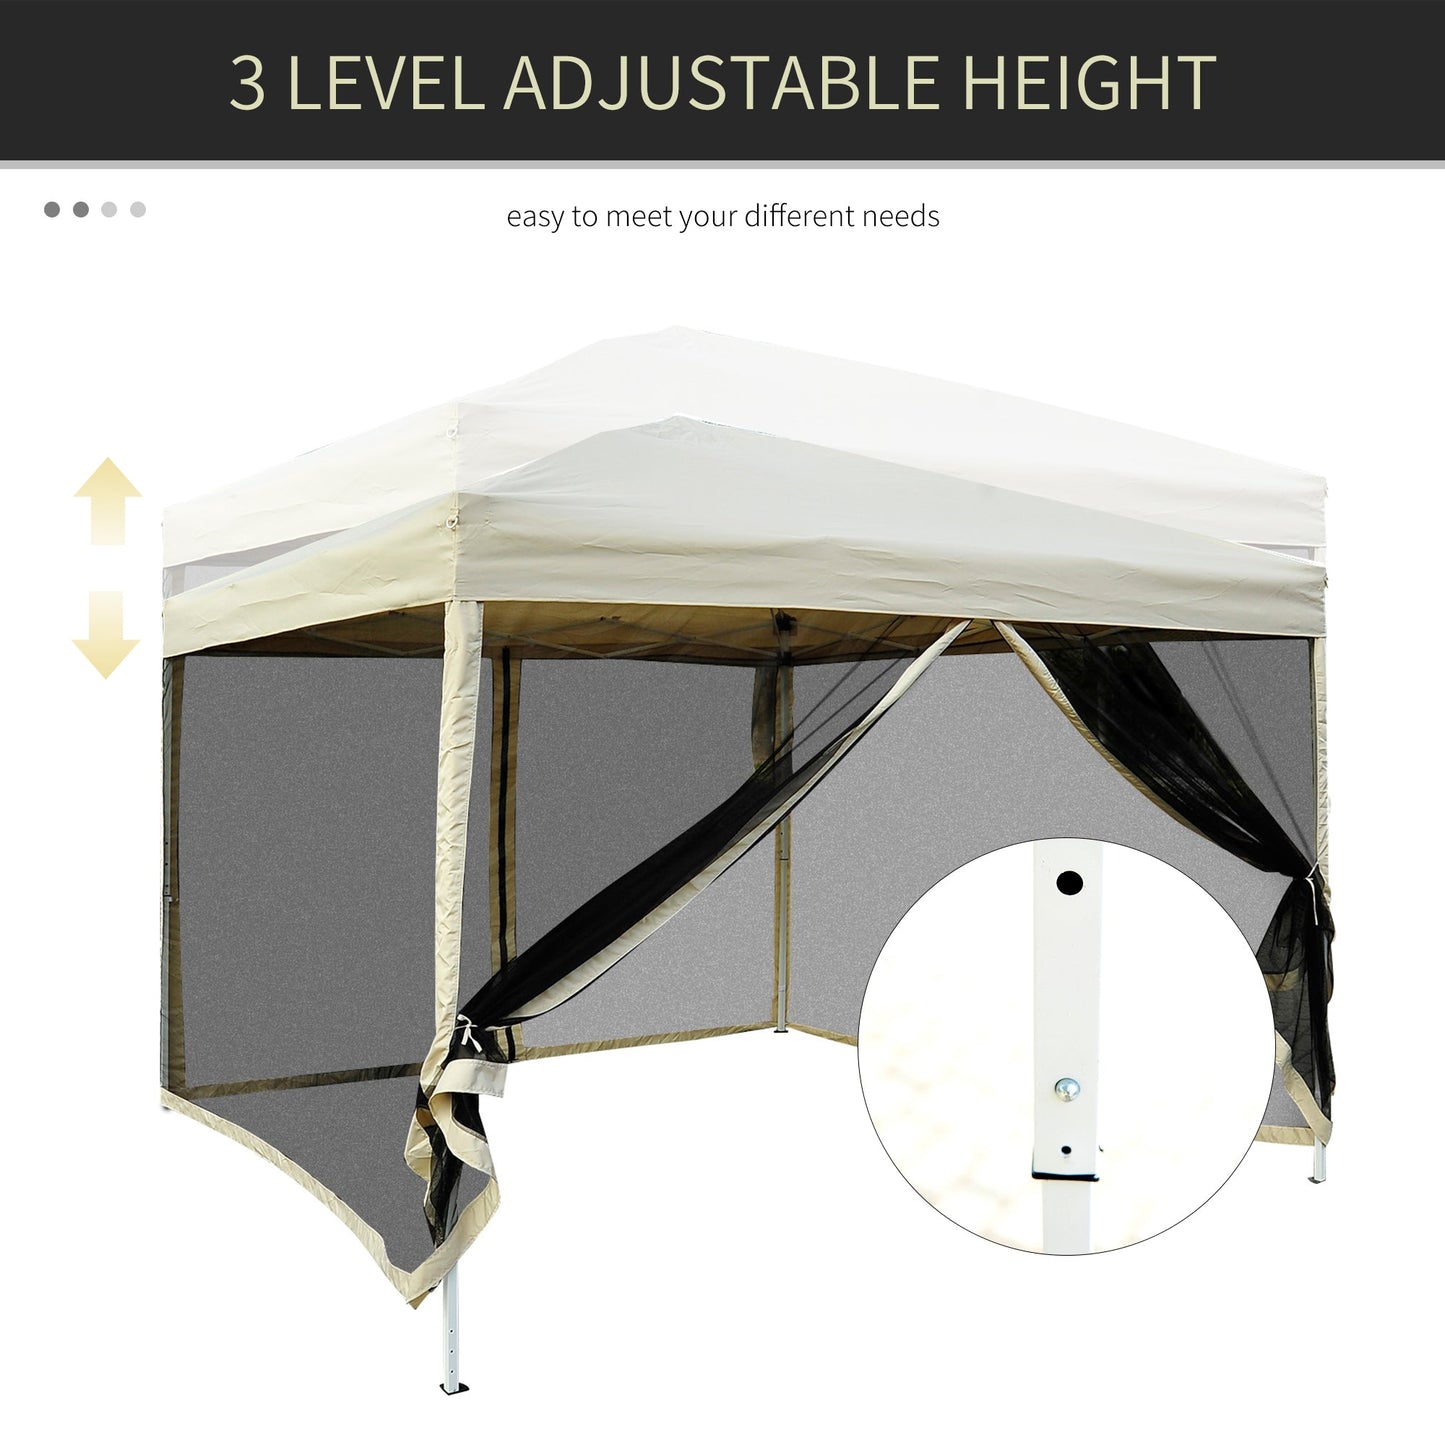 Outdoor and Garden-10' x 10' Pop Up Canopy Tent with Breathable Mesh Sidewalls, Easy Height Adjustable, Easy Transport Carrying Bag for Backyard Garden Patio - Outdoor Style Company